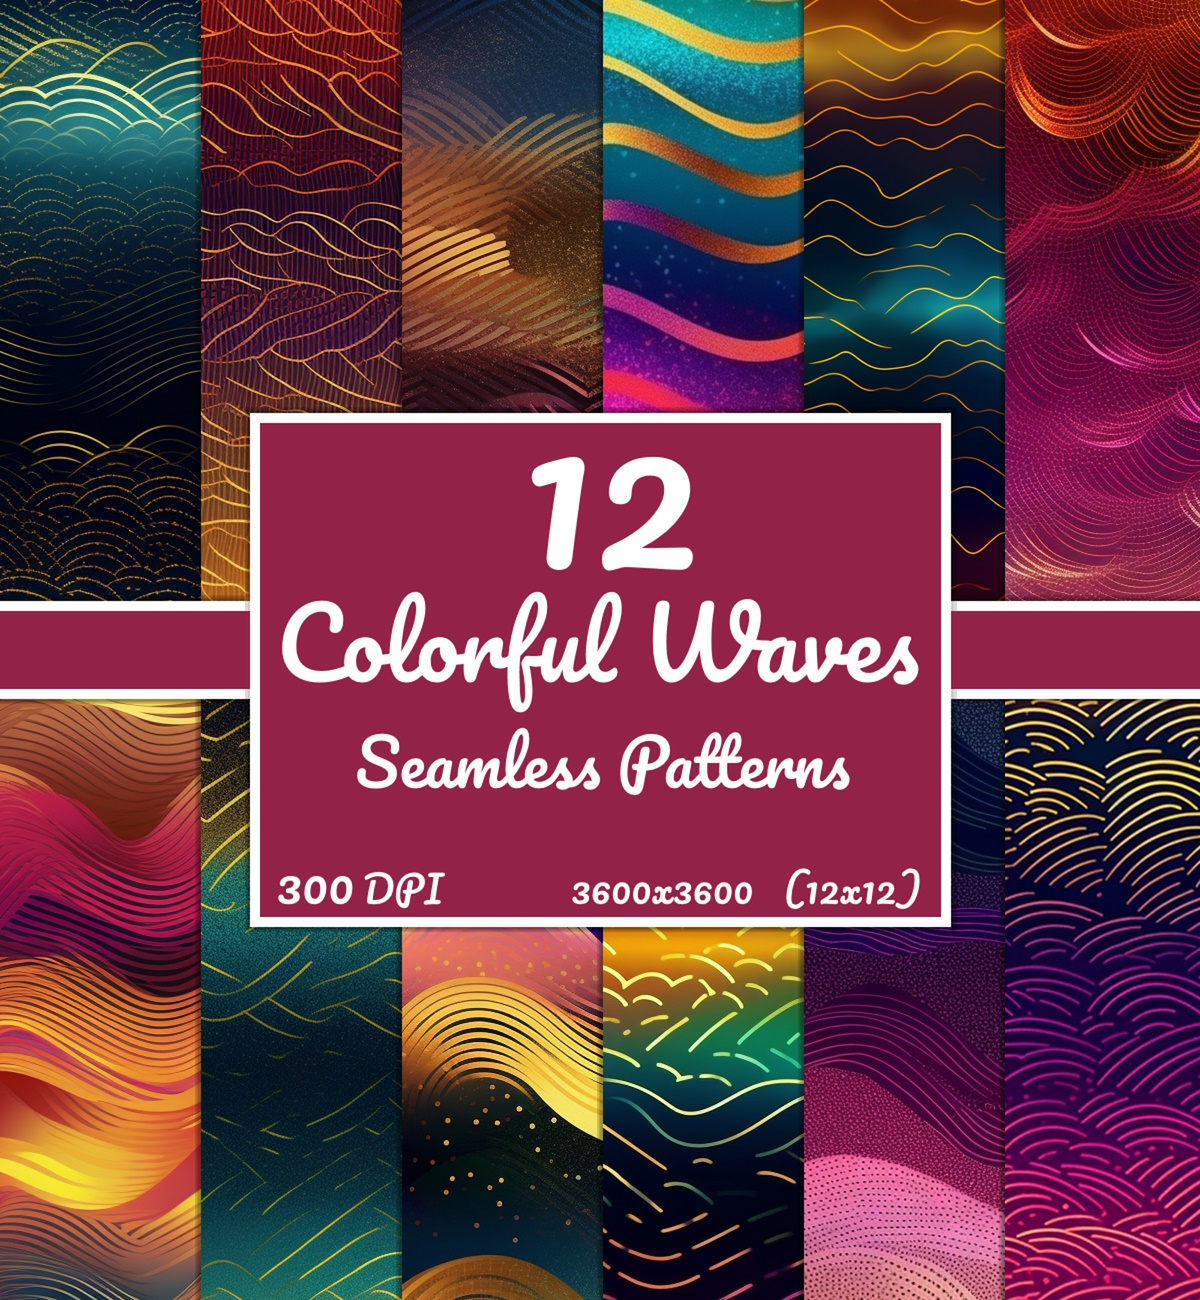 Colorful Waves Seamless Patterns